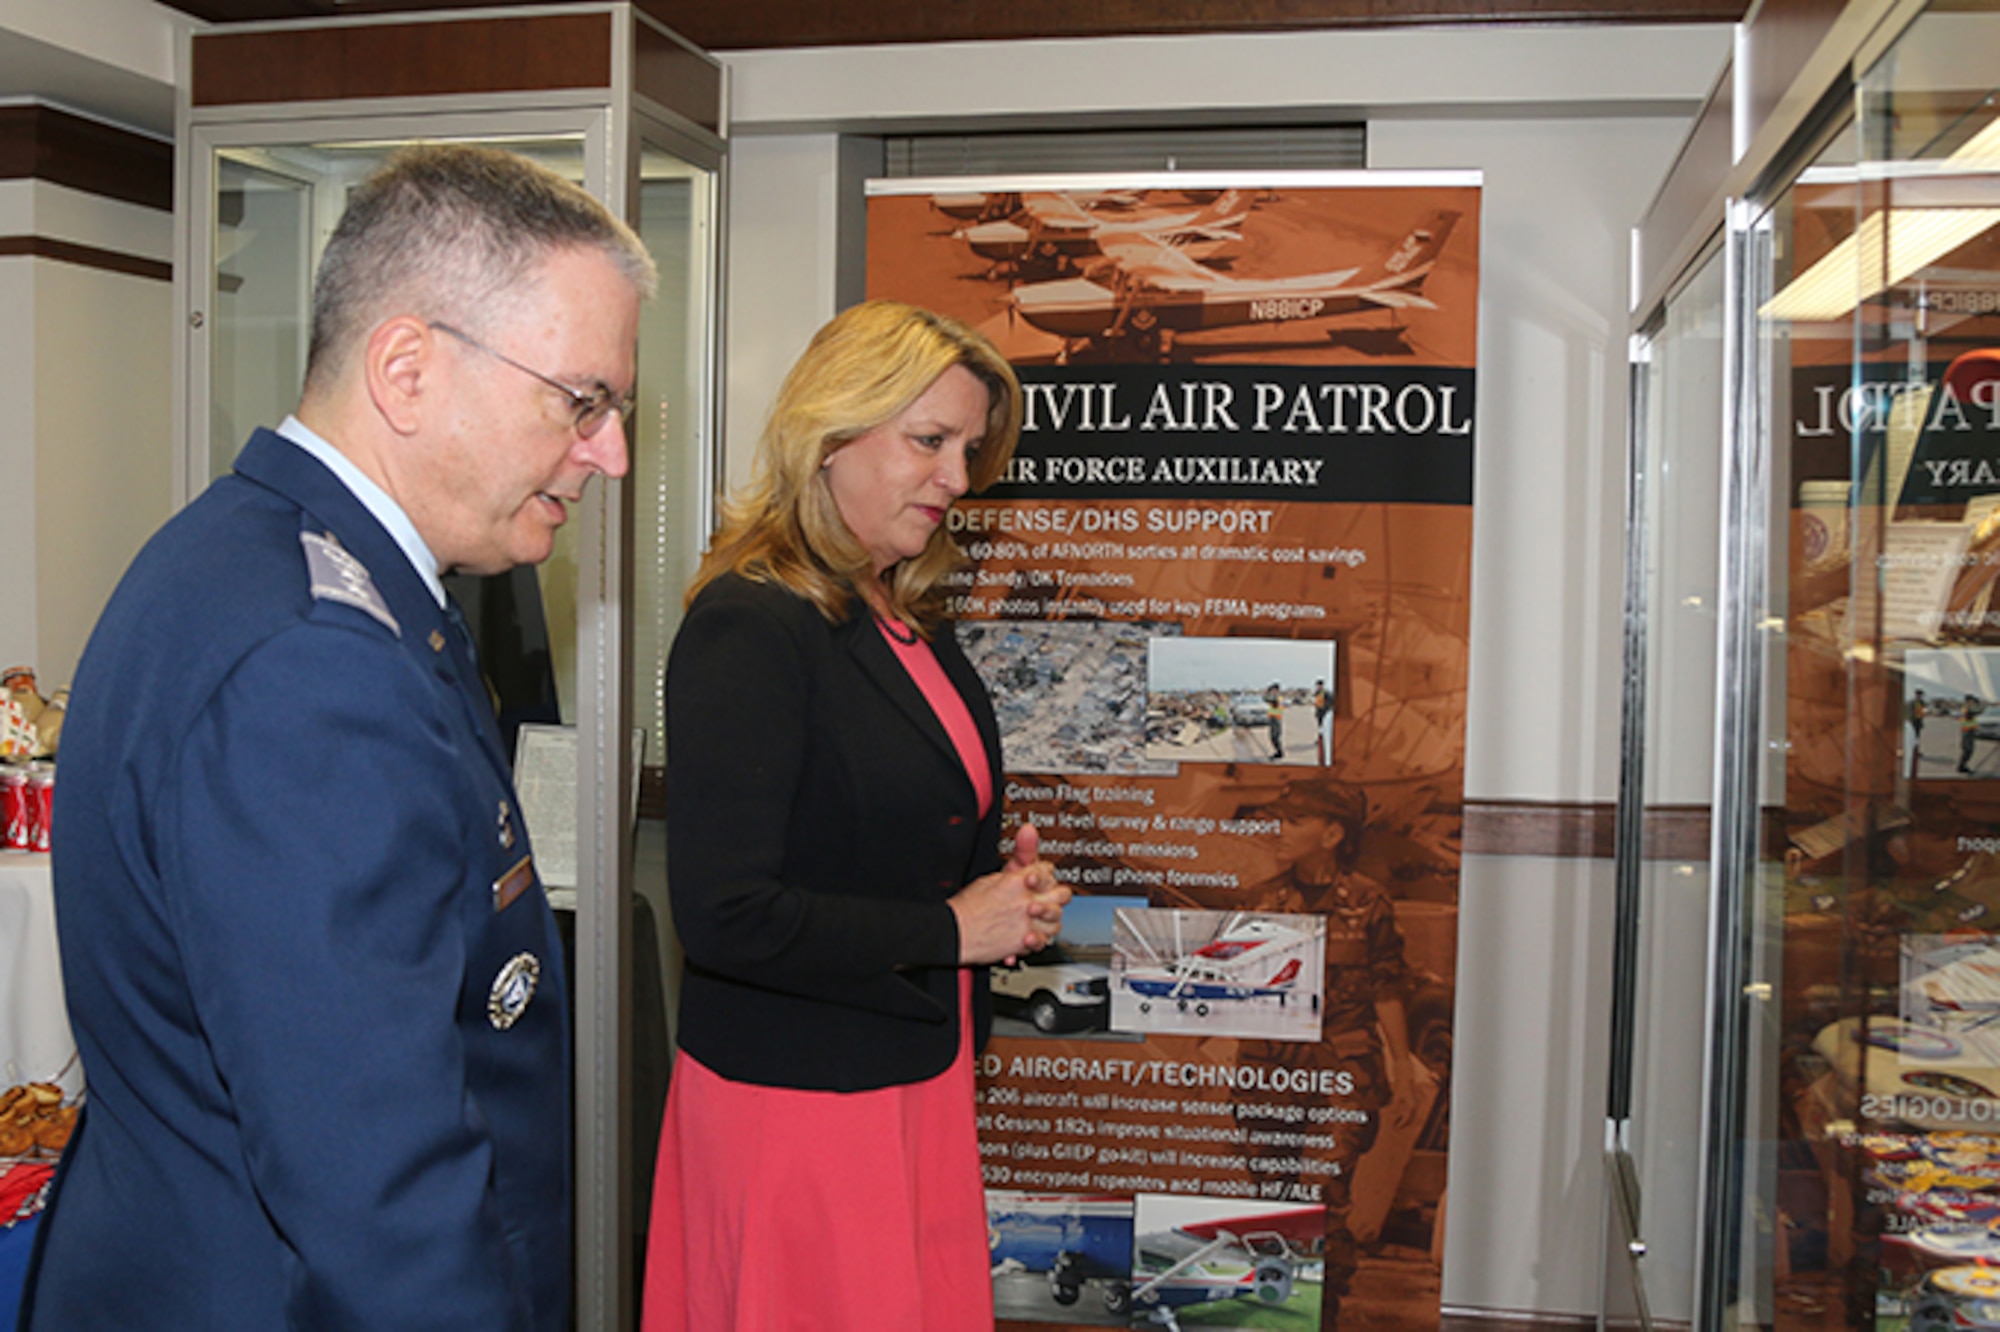 Secretary of the Air Force Deborah Lee James paused at Civil Air Patrol’s History Exhibit to share her thoughts on the value and significance of CAP’s role as a part of the Air Force Total Force. The display, which is housed in the front lobby at National Headquarters, features artifacts from CAP’s 75 years of service.